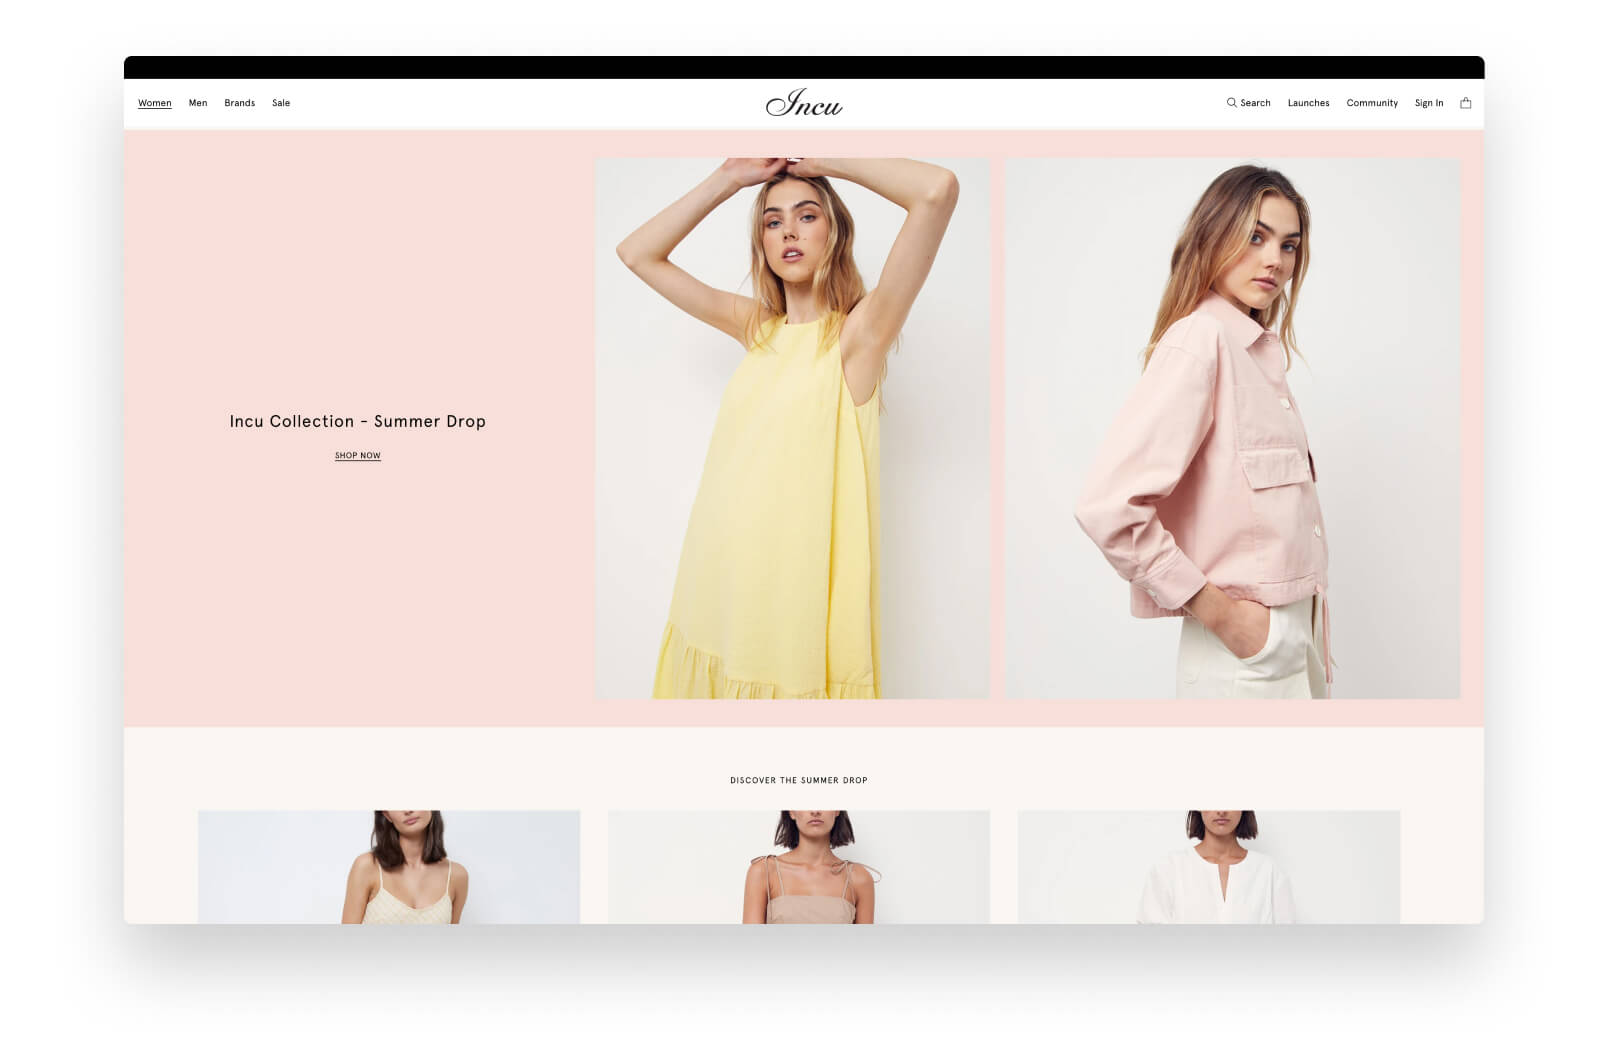 A screenshot of the desktop view of Incu's digital store, showing the homepage with a model dressed in pastel coloured clothes.